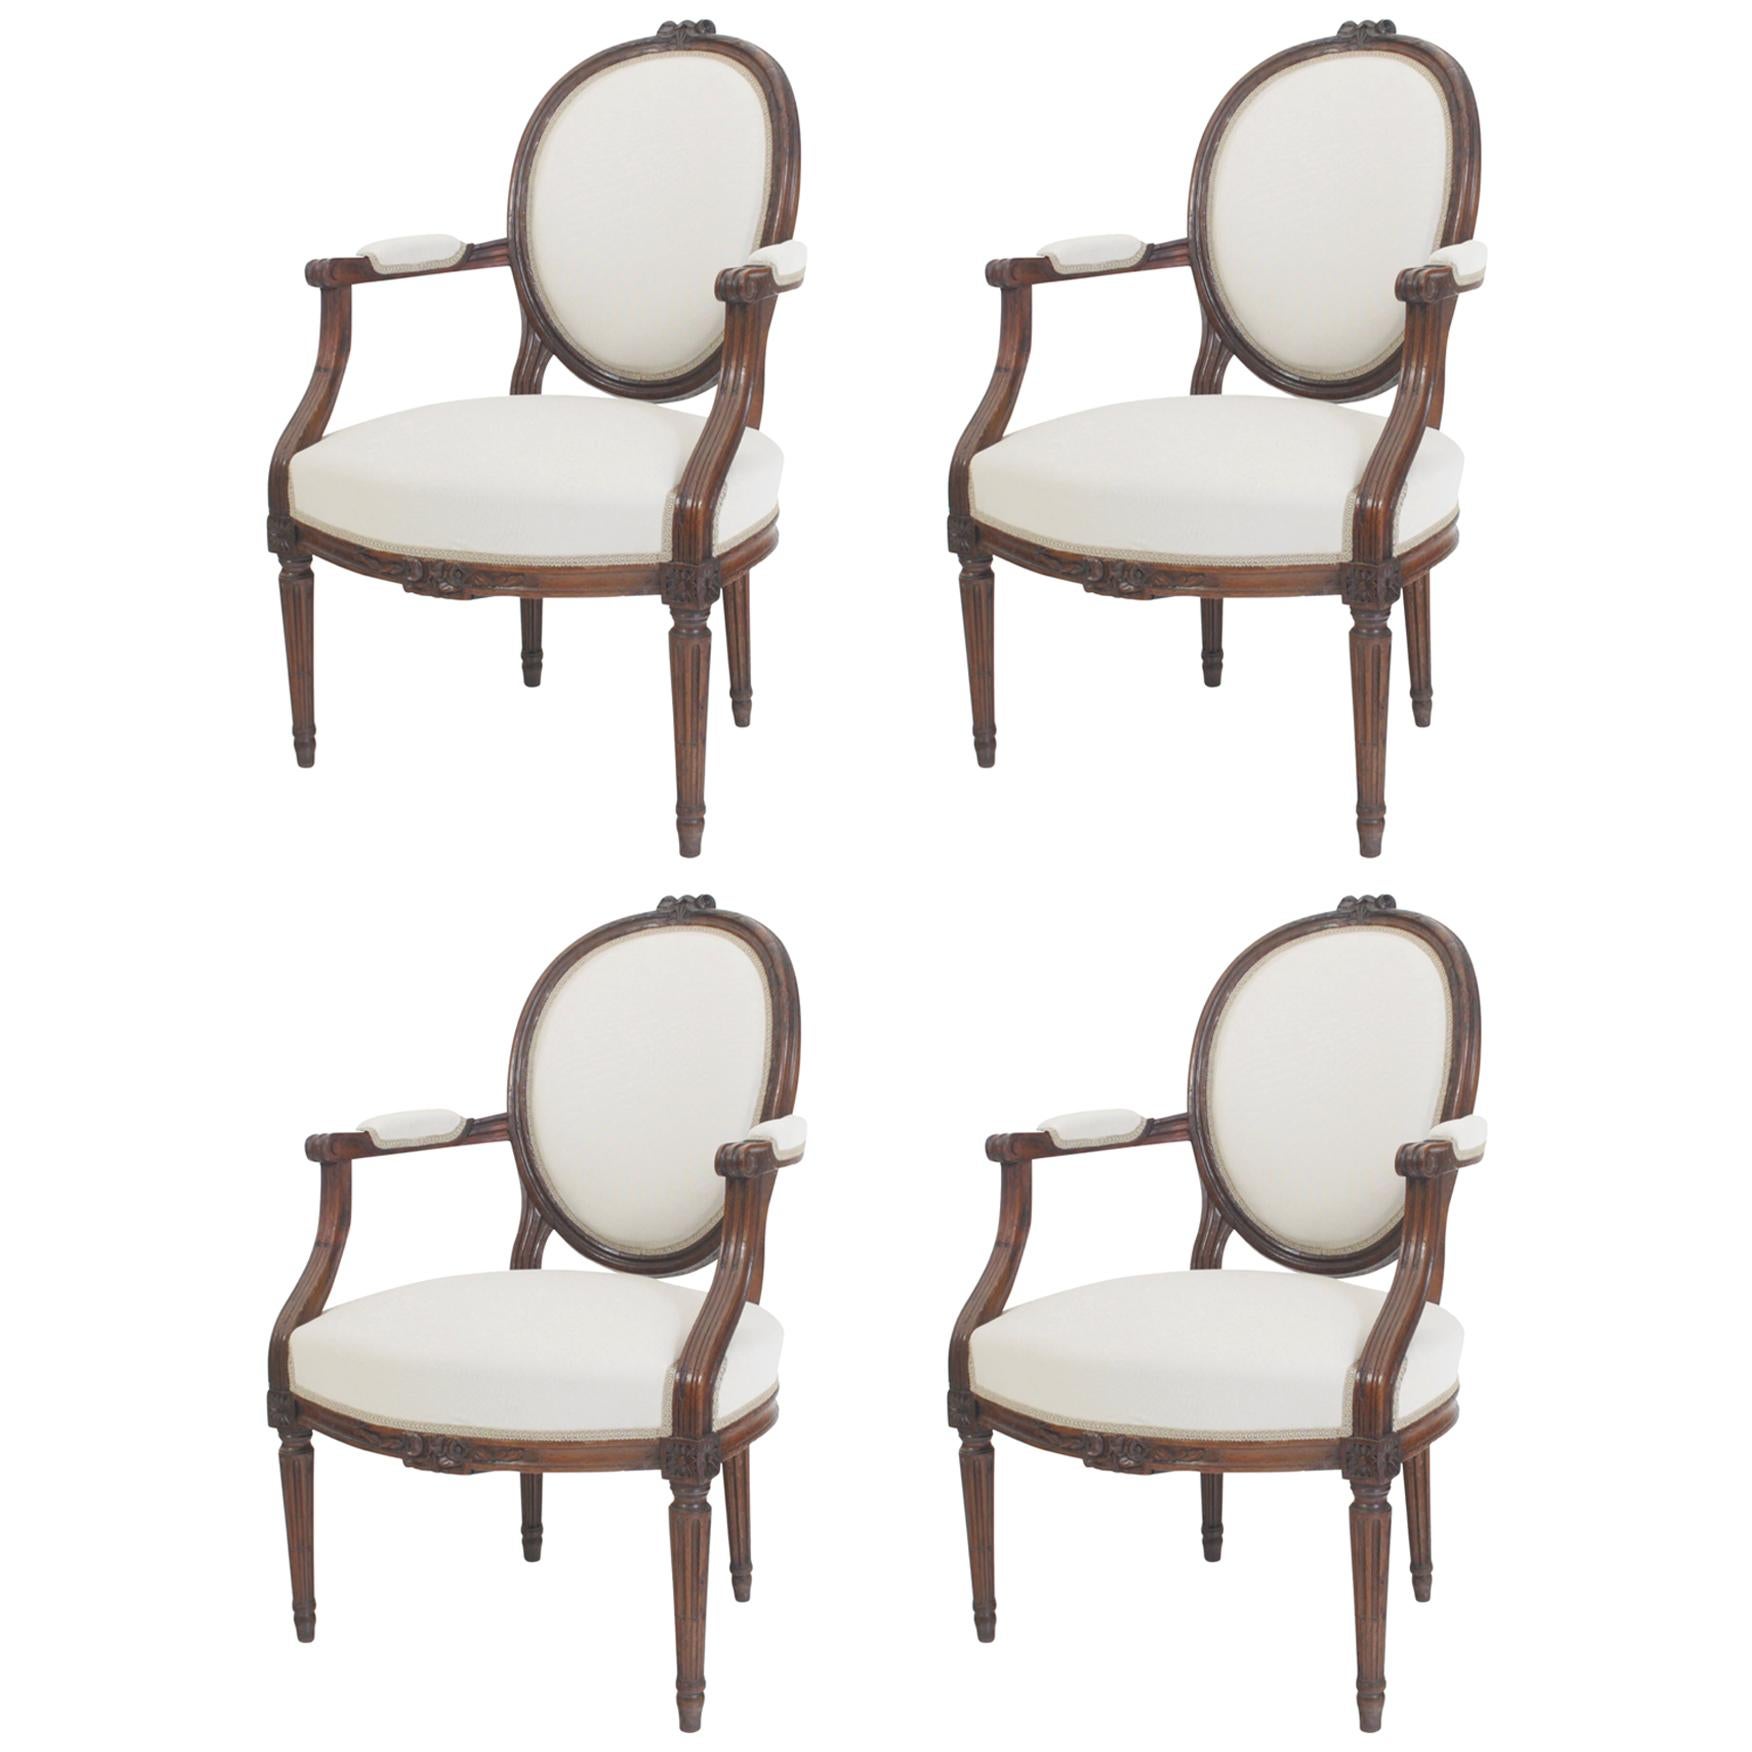 Set of Four Louis Seize-Style Armchairs, France, First Half of the 19th Century